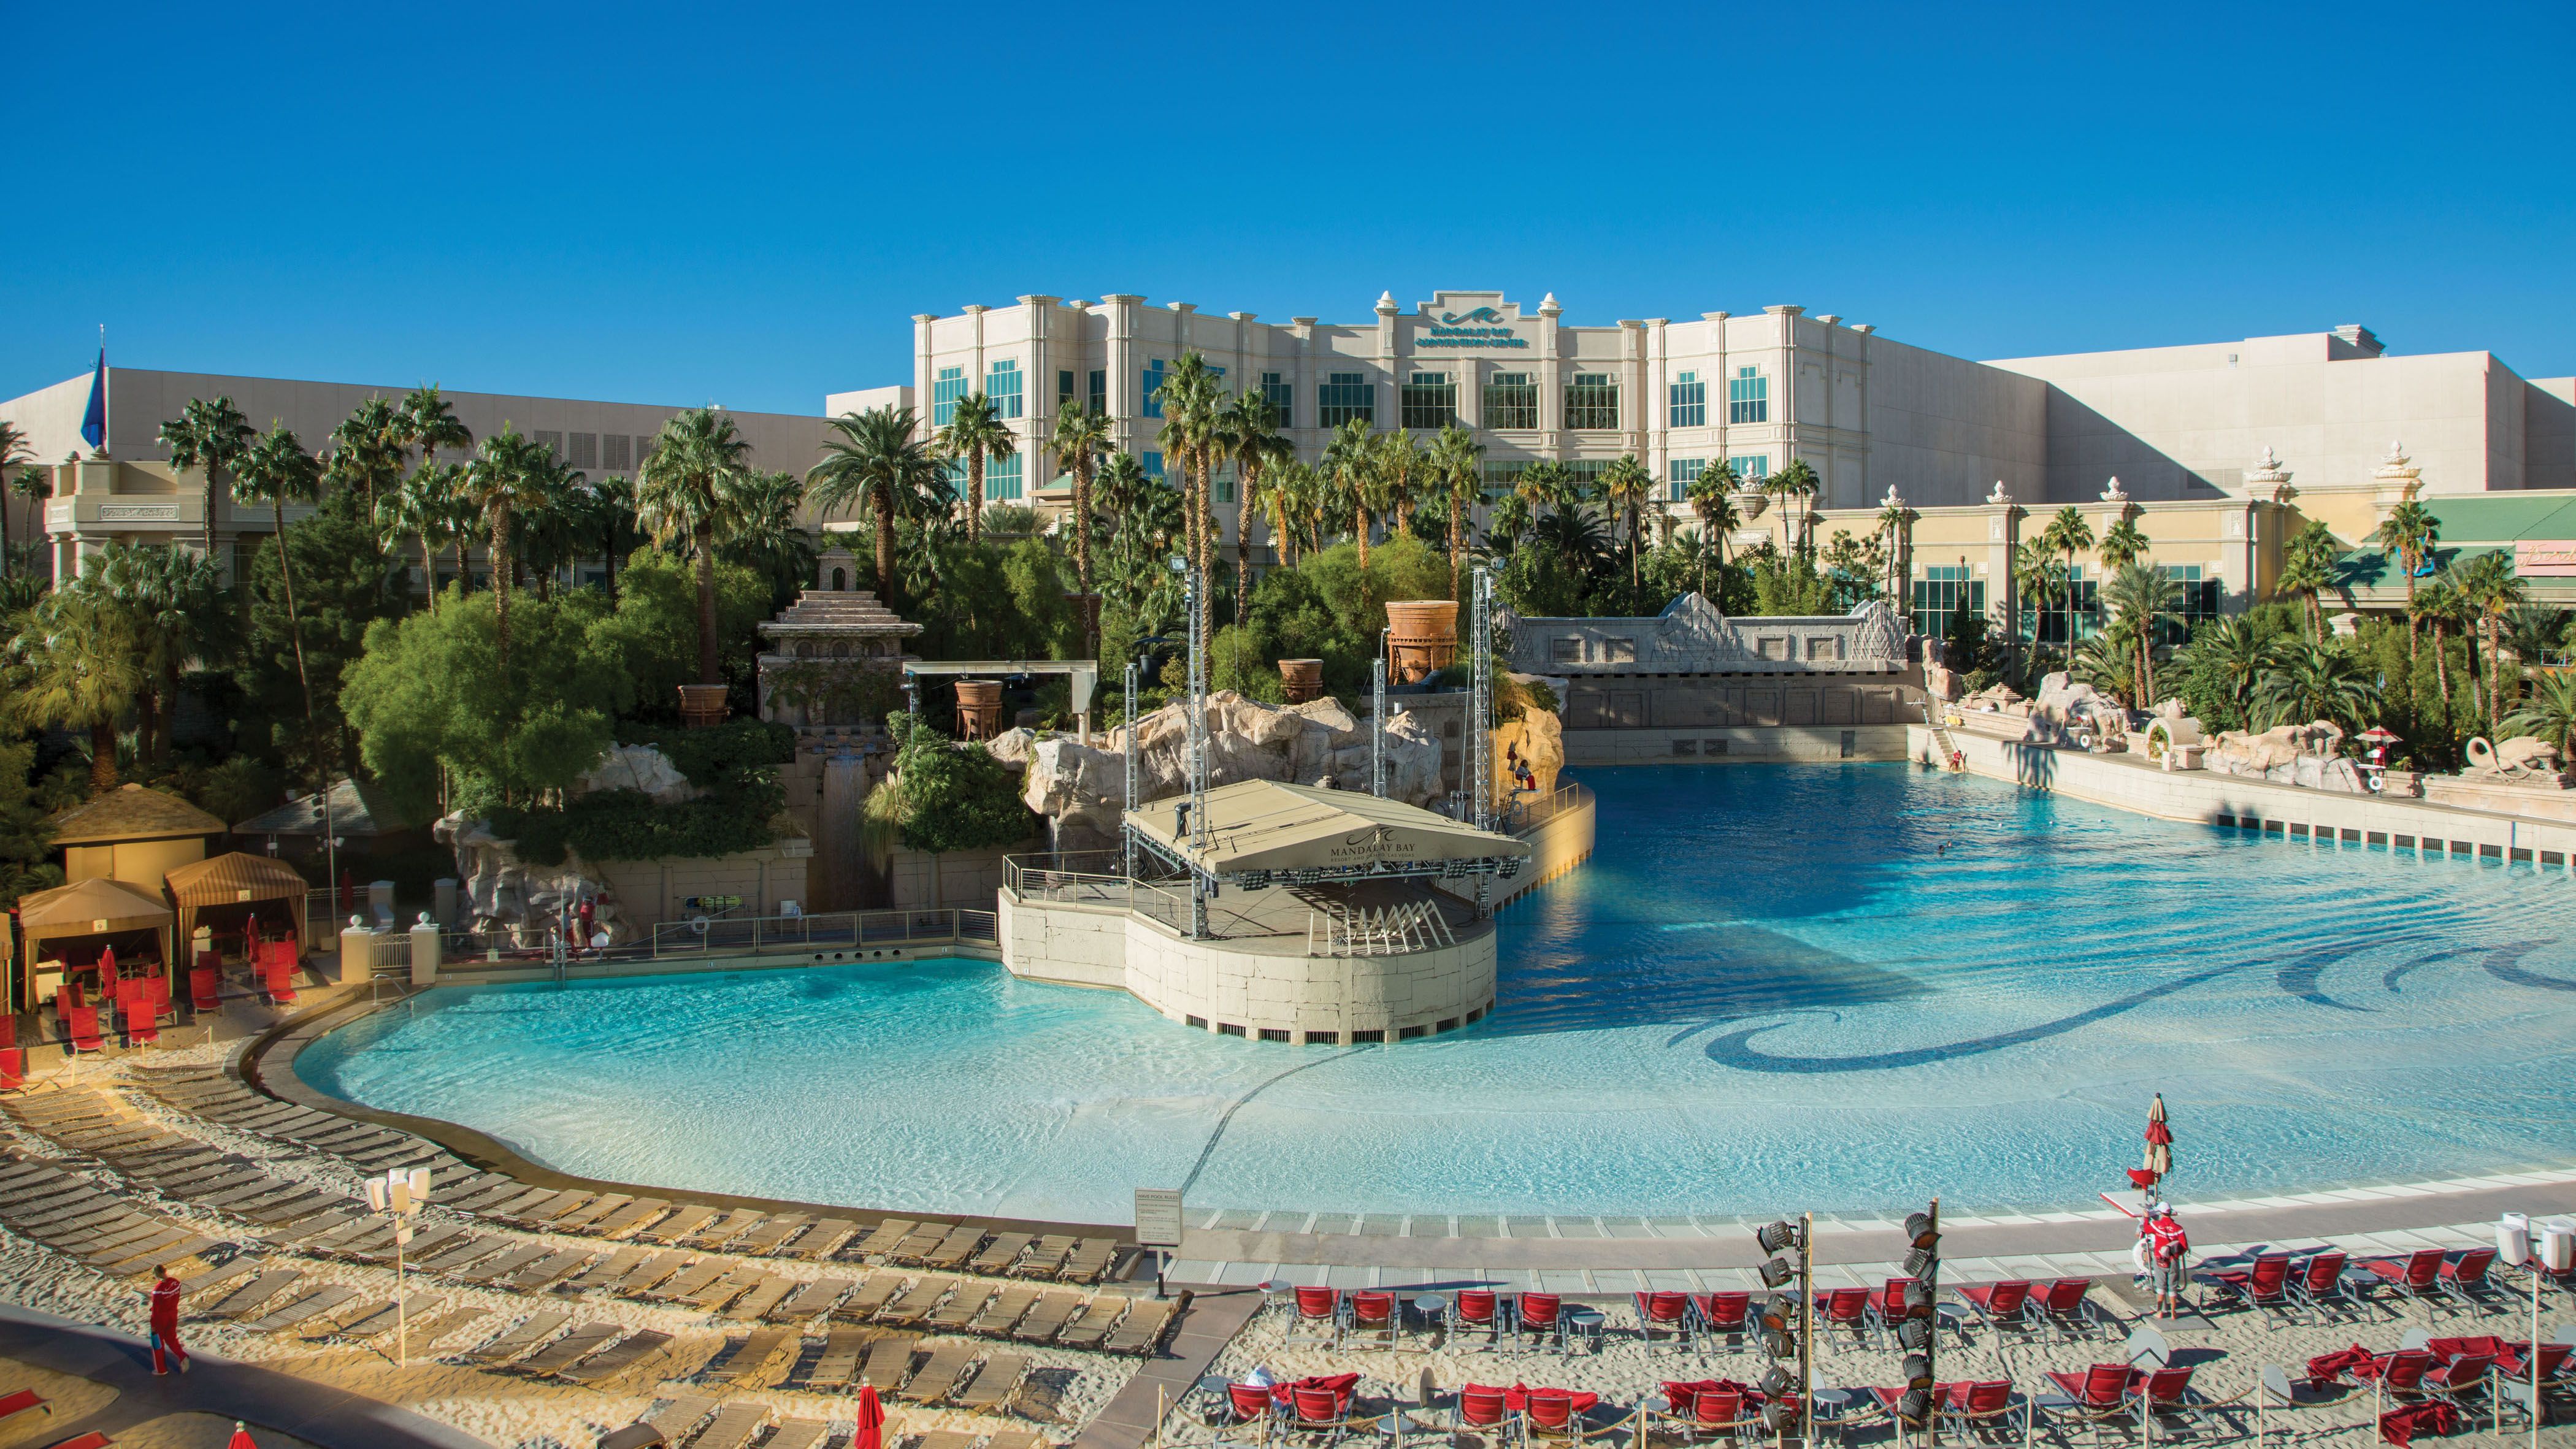 11 of the best pools in Las Vegas! - Blogger at Large